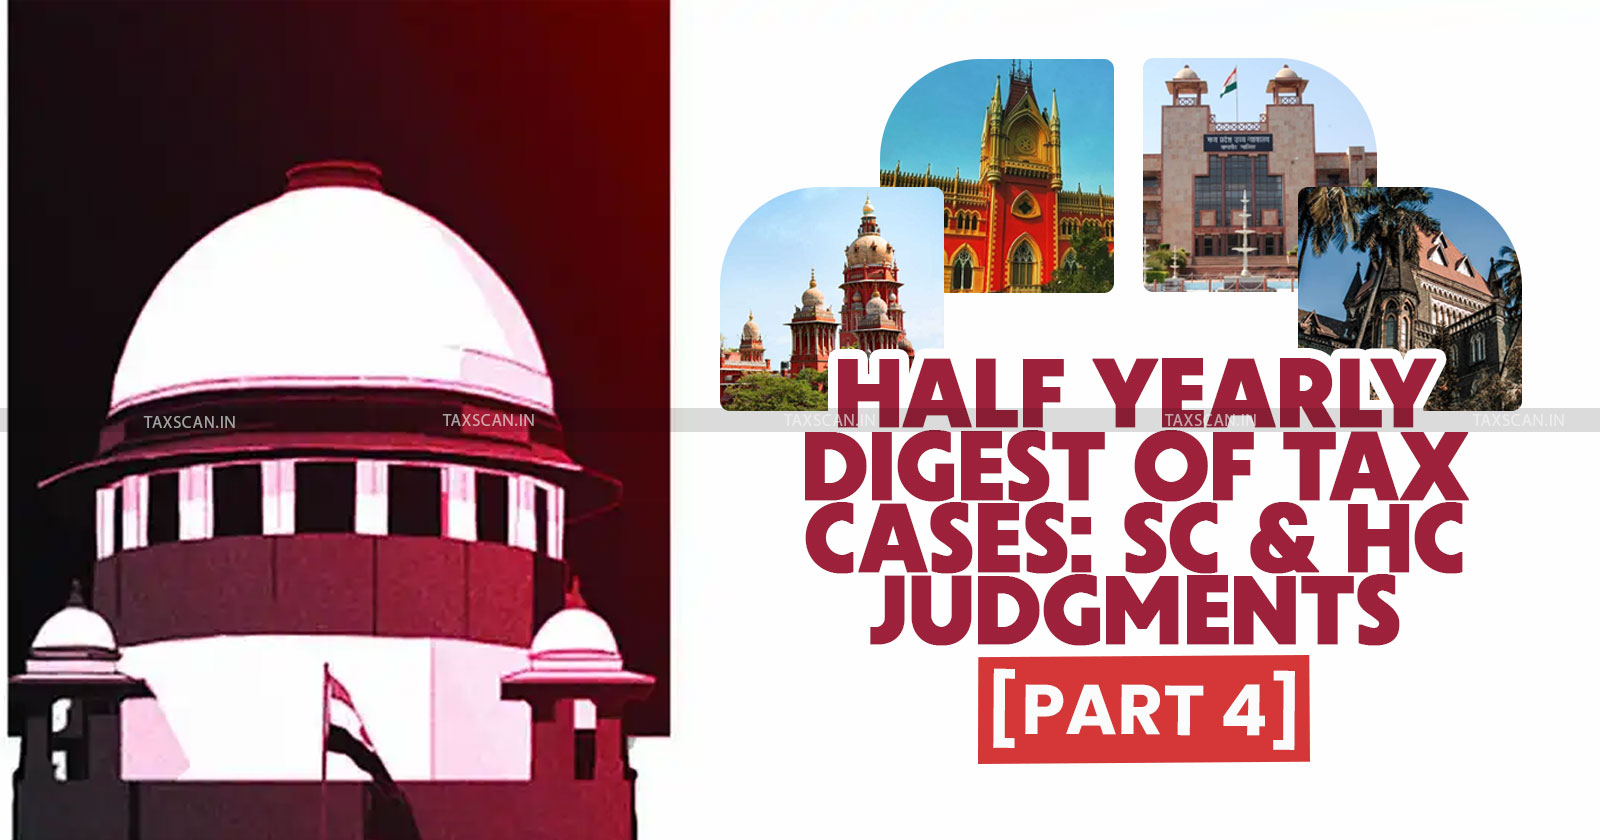 Half Yearly Digest of Tax Cases - Supreme Court - High Court Judgments - Case Digest 2024 - Supreme court and high court case digest - half yearly case digest - taxscan